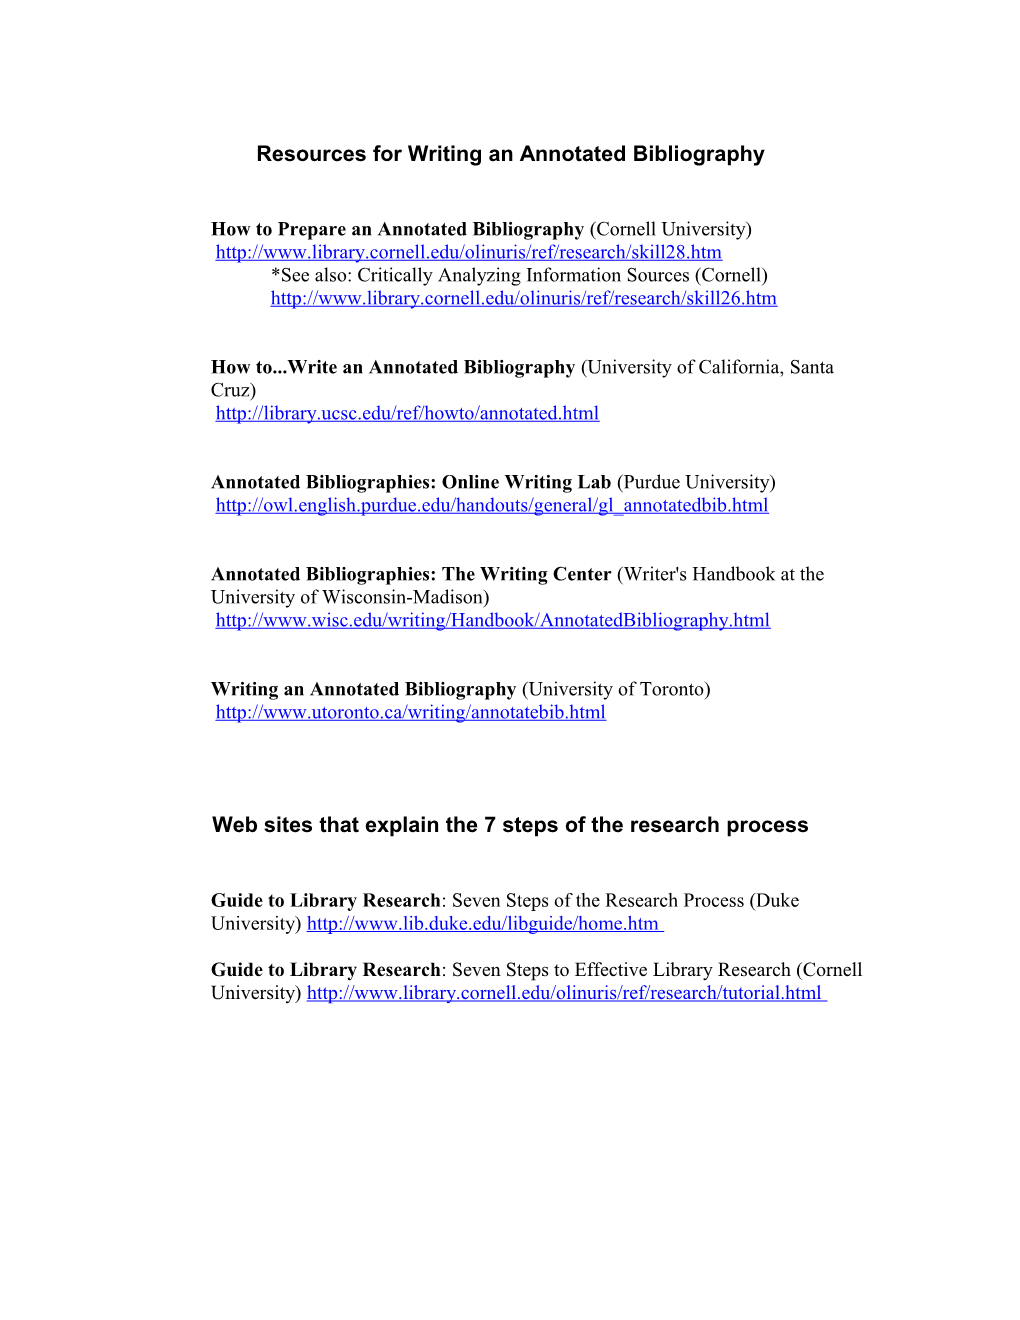 Resources for Writing an Annotated Bibliography